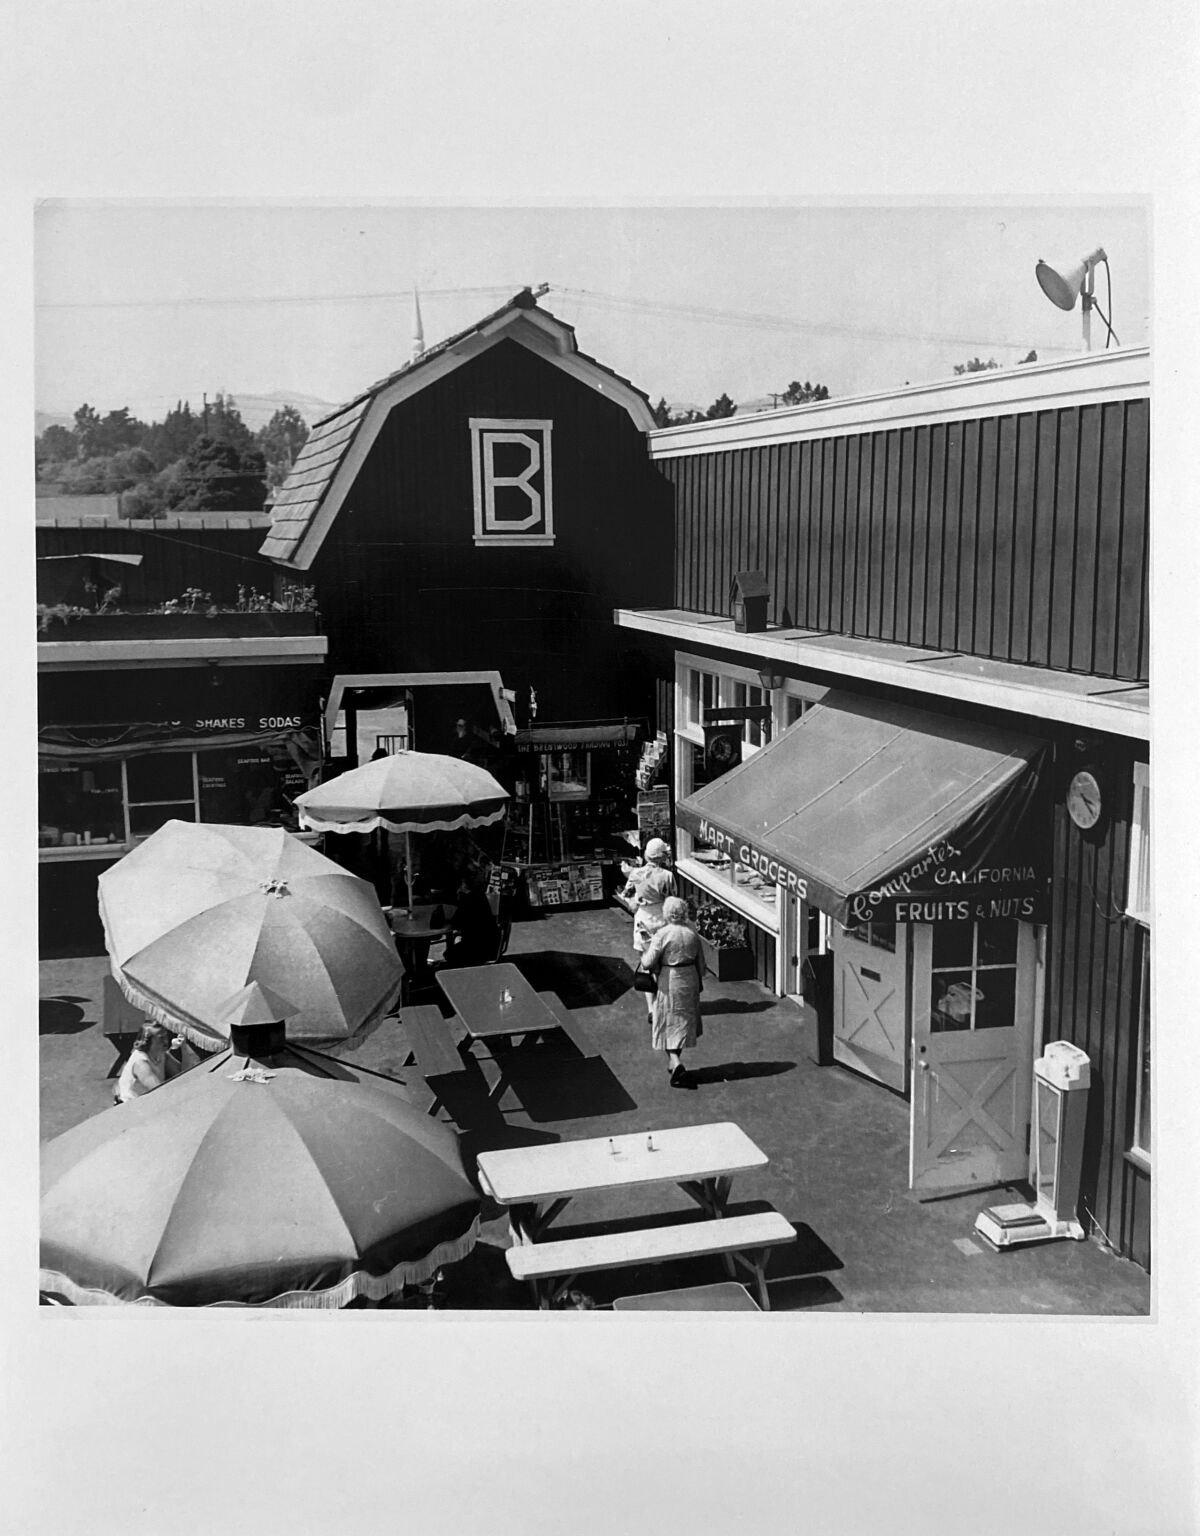 A vintage photo of a building that looks like a barn, with a white B, and tables with umbrellas in front of it.